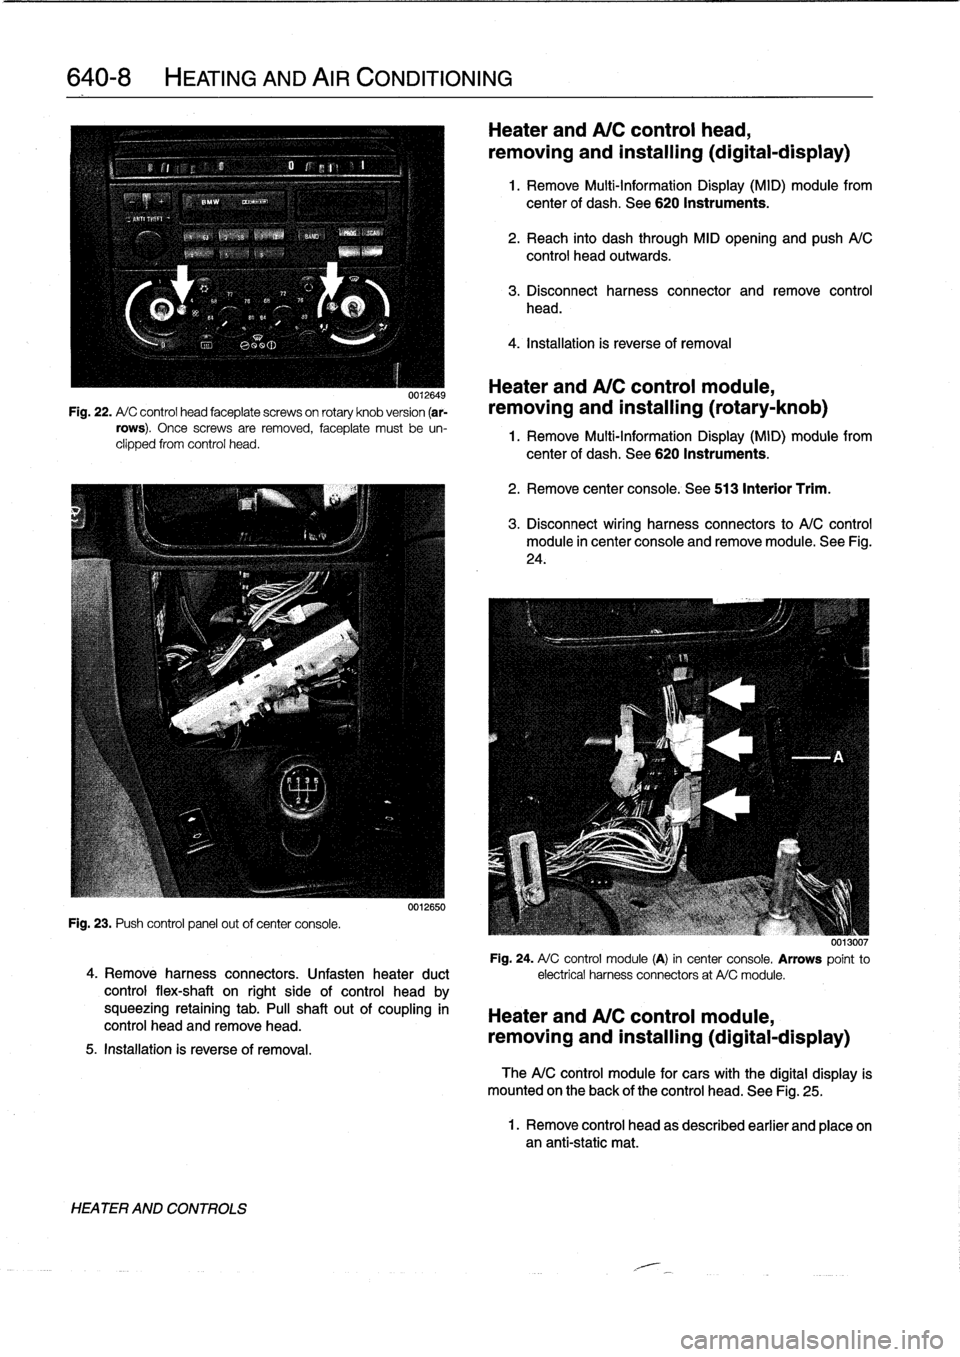 BMW 318i 1998 E36 Owners Manual 
640-8

	

HEATING
AND
AIR
CONDITIONING

0012649

Fig
.
22
.
A/
C
control
head
faceplate
screwson
rotary
knob
version
(ar-
rows)
.
Once
screws
are
removed,
faceplate
must
be
un-
clipped
from
control
h